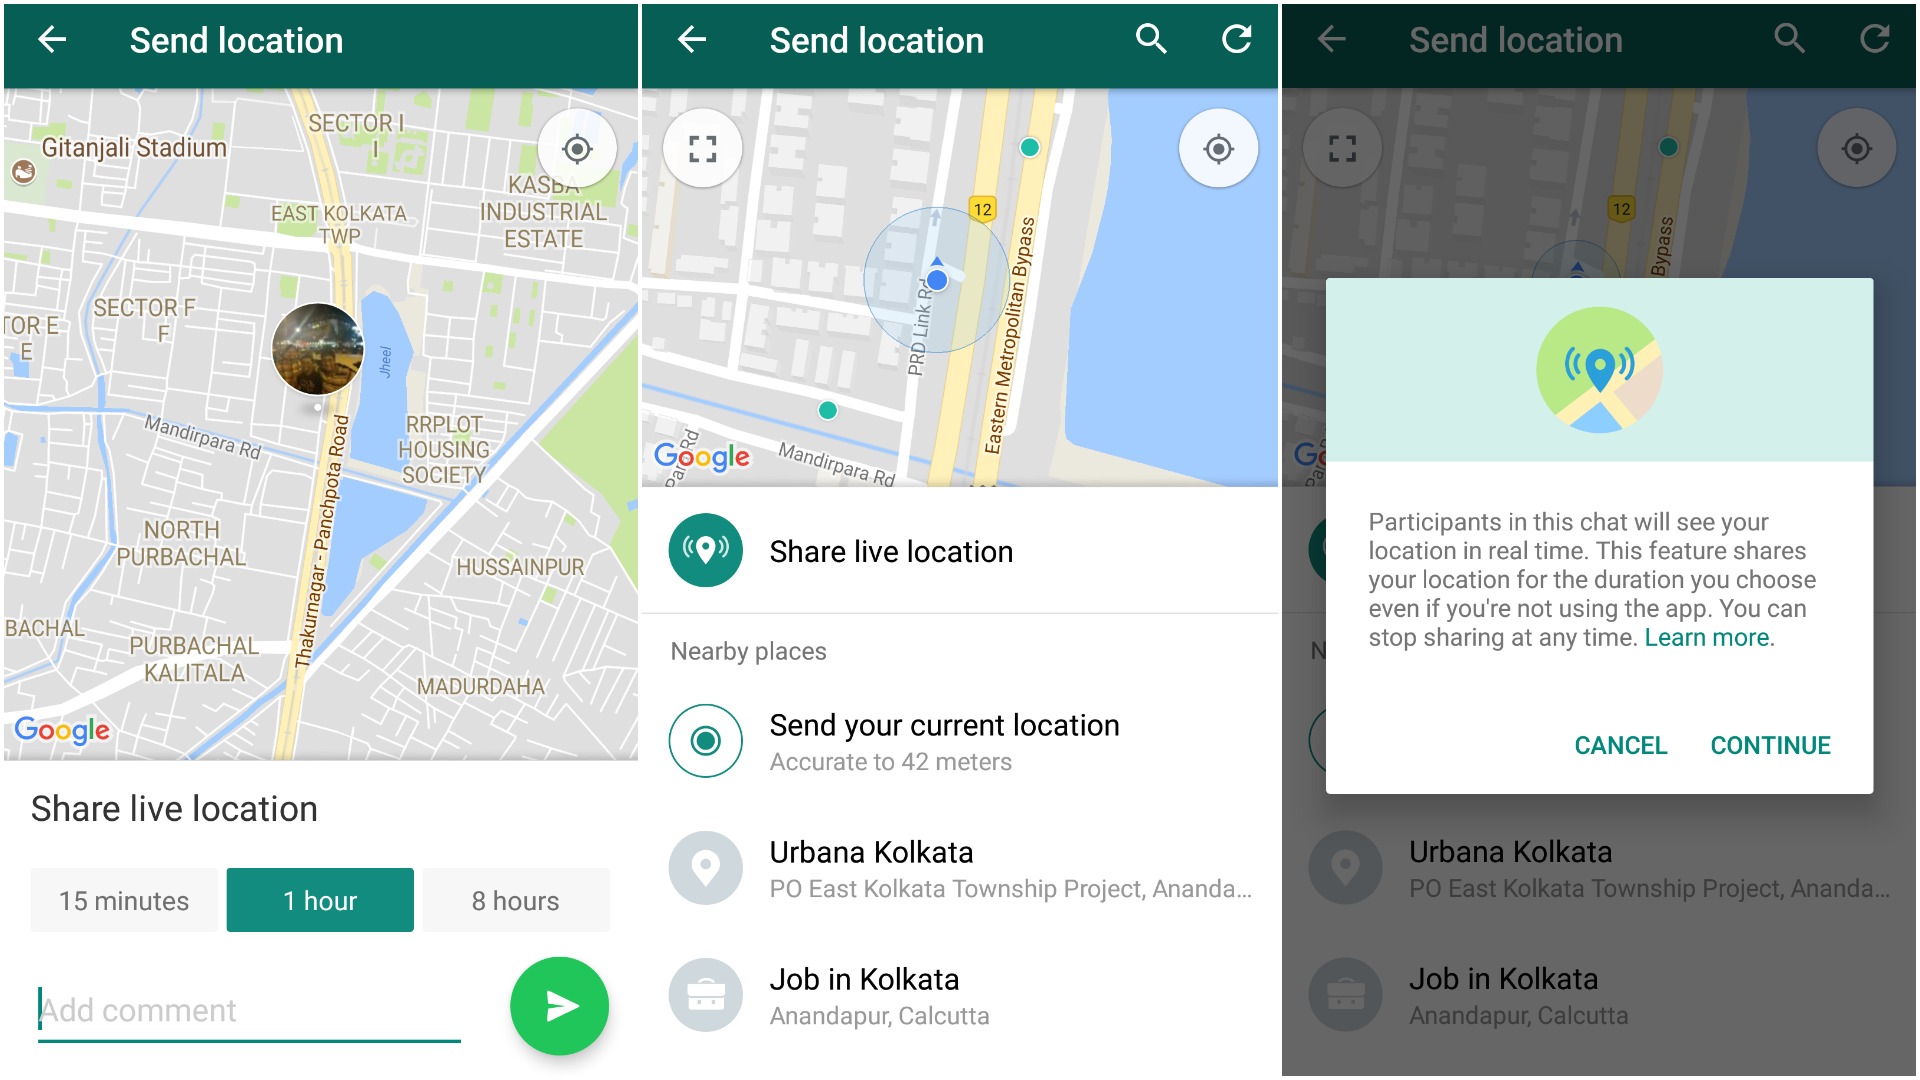 How to share live location in WhatsApp? | TechRadar